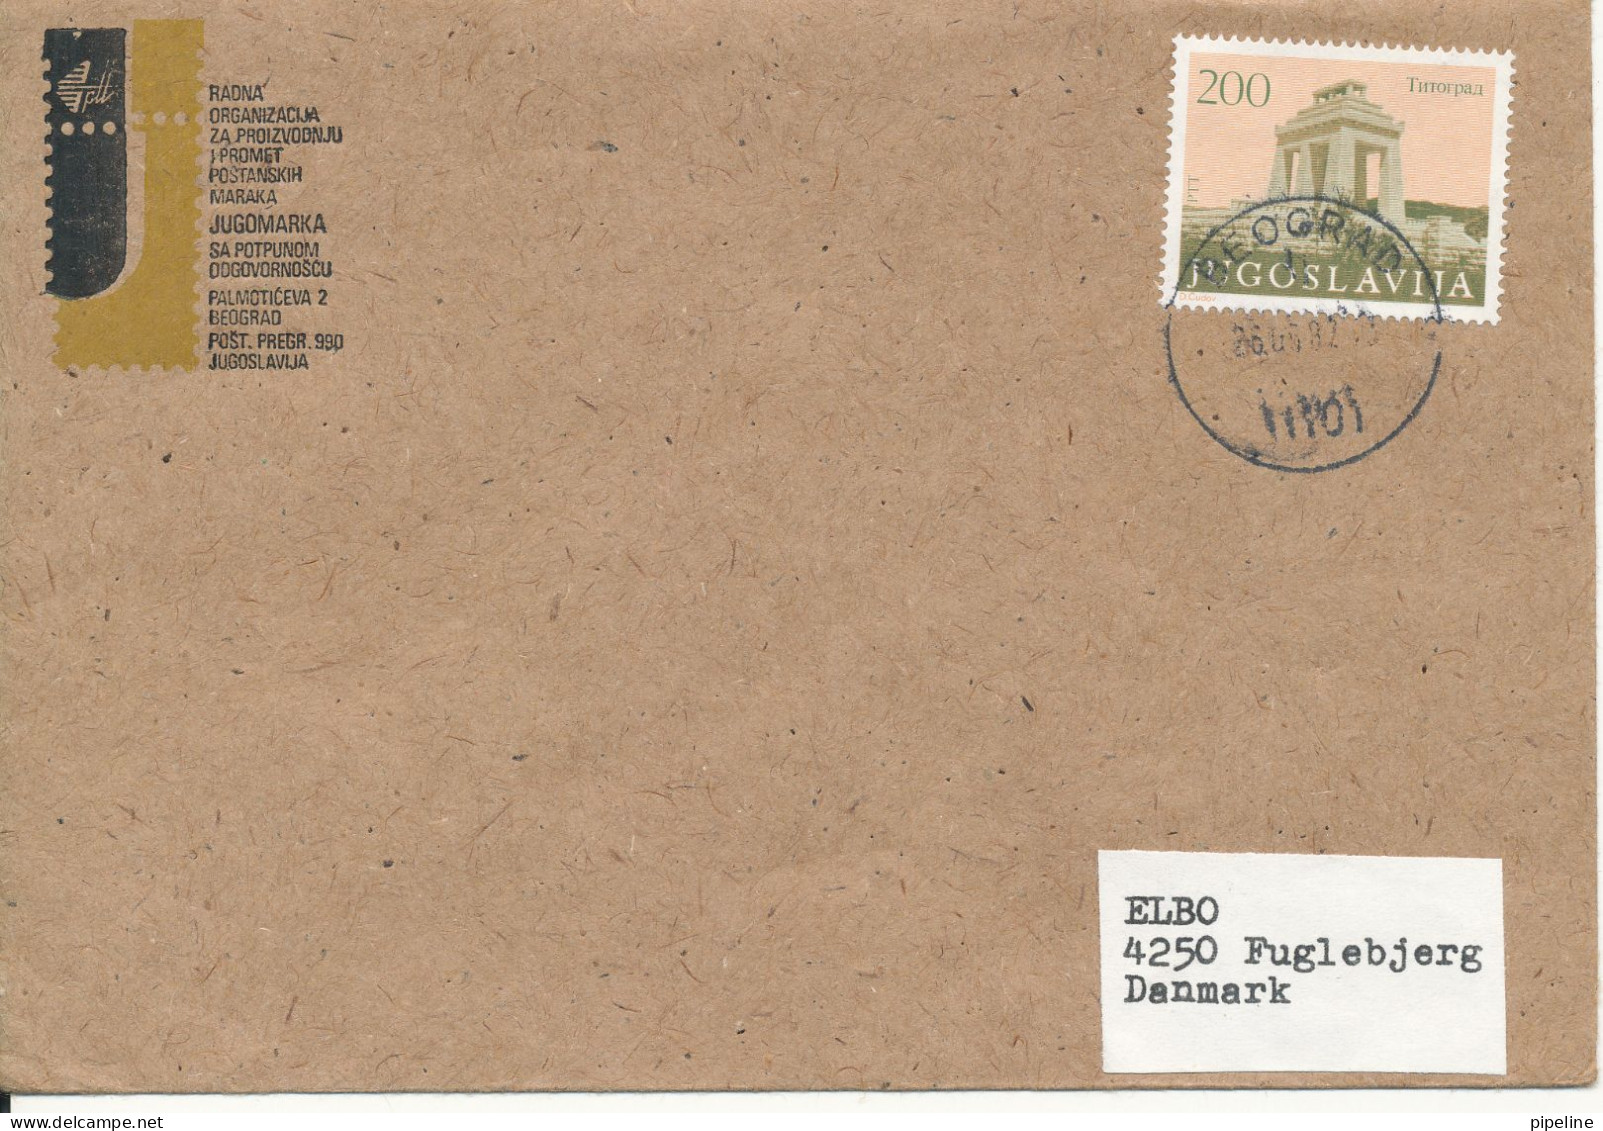 Yugoslavia Cover Sent To Denmark Beograd 26-5-1982 Single Franked - Lettres & Documents